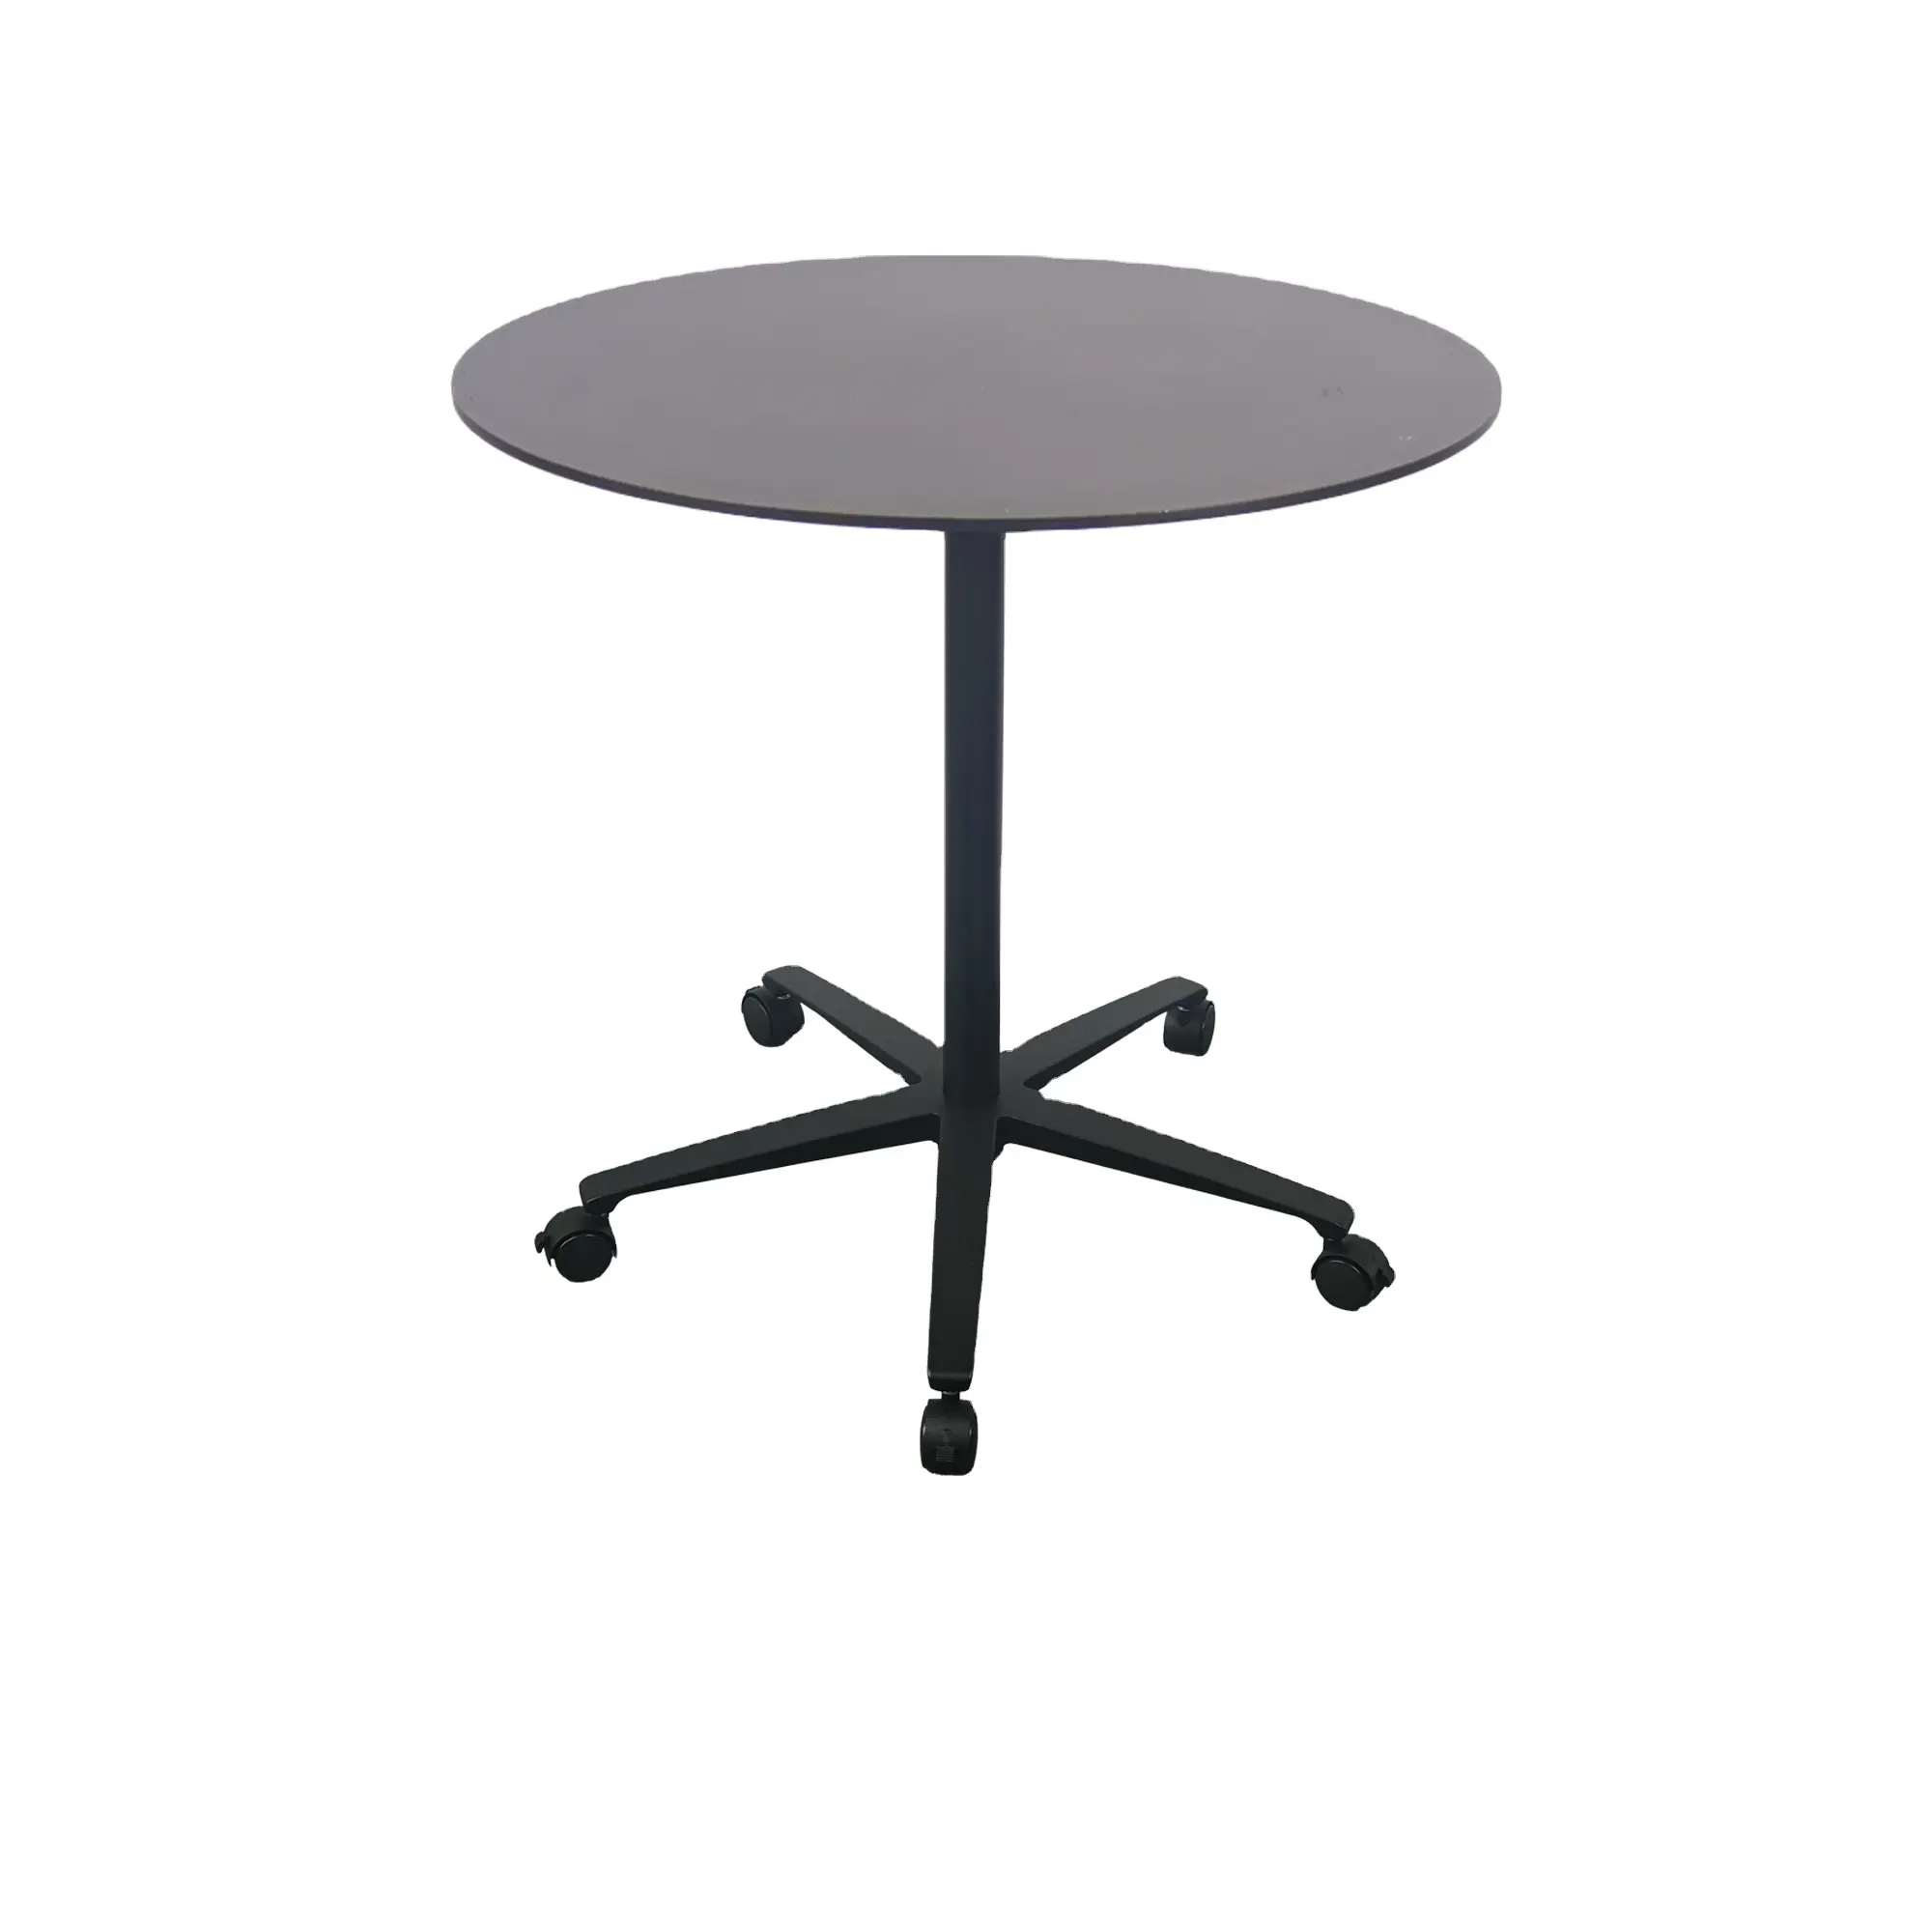 Mobile coffee table Computer desk round table customized AL alloy base Aluminum coffee table